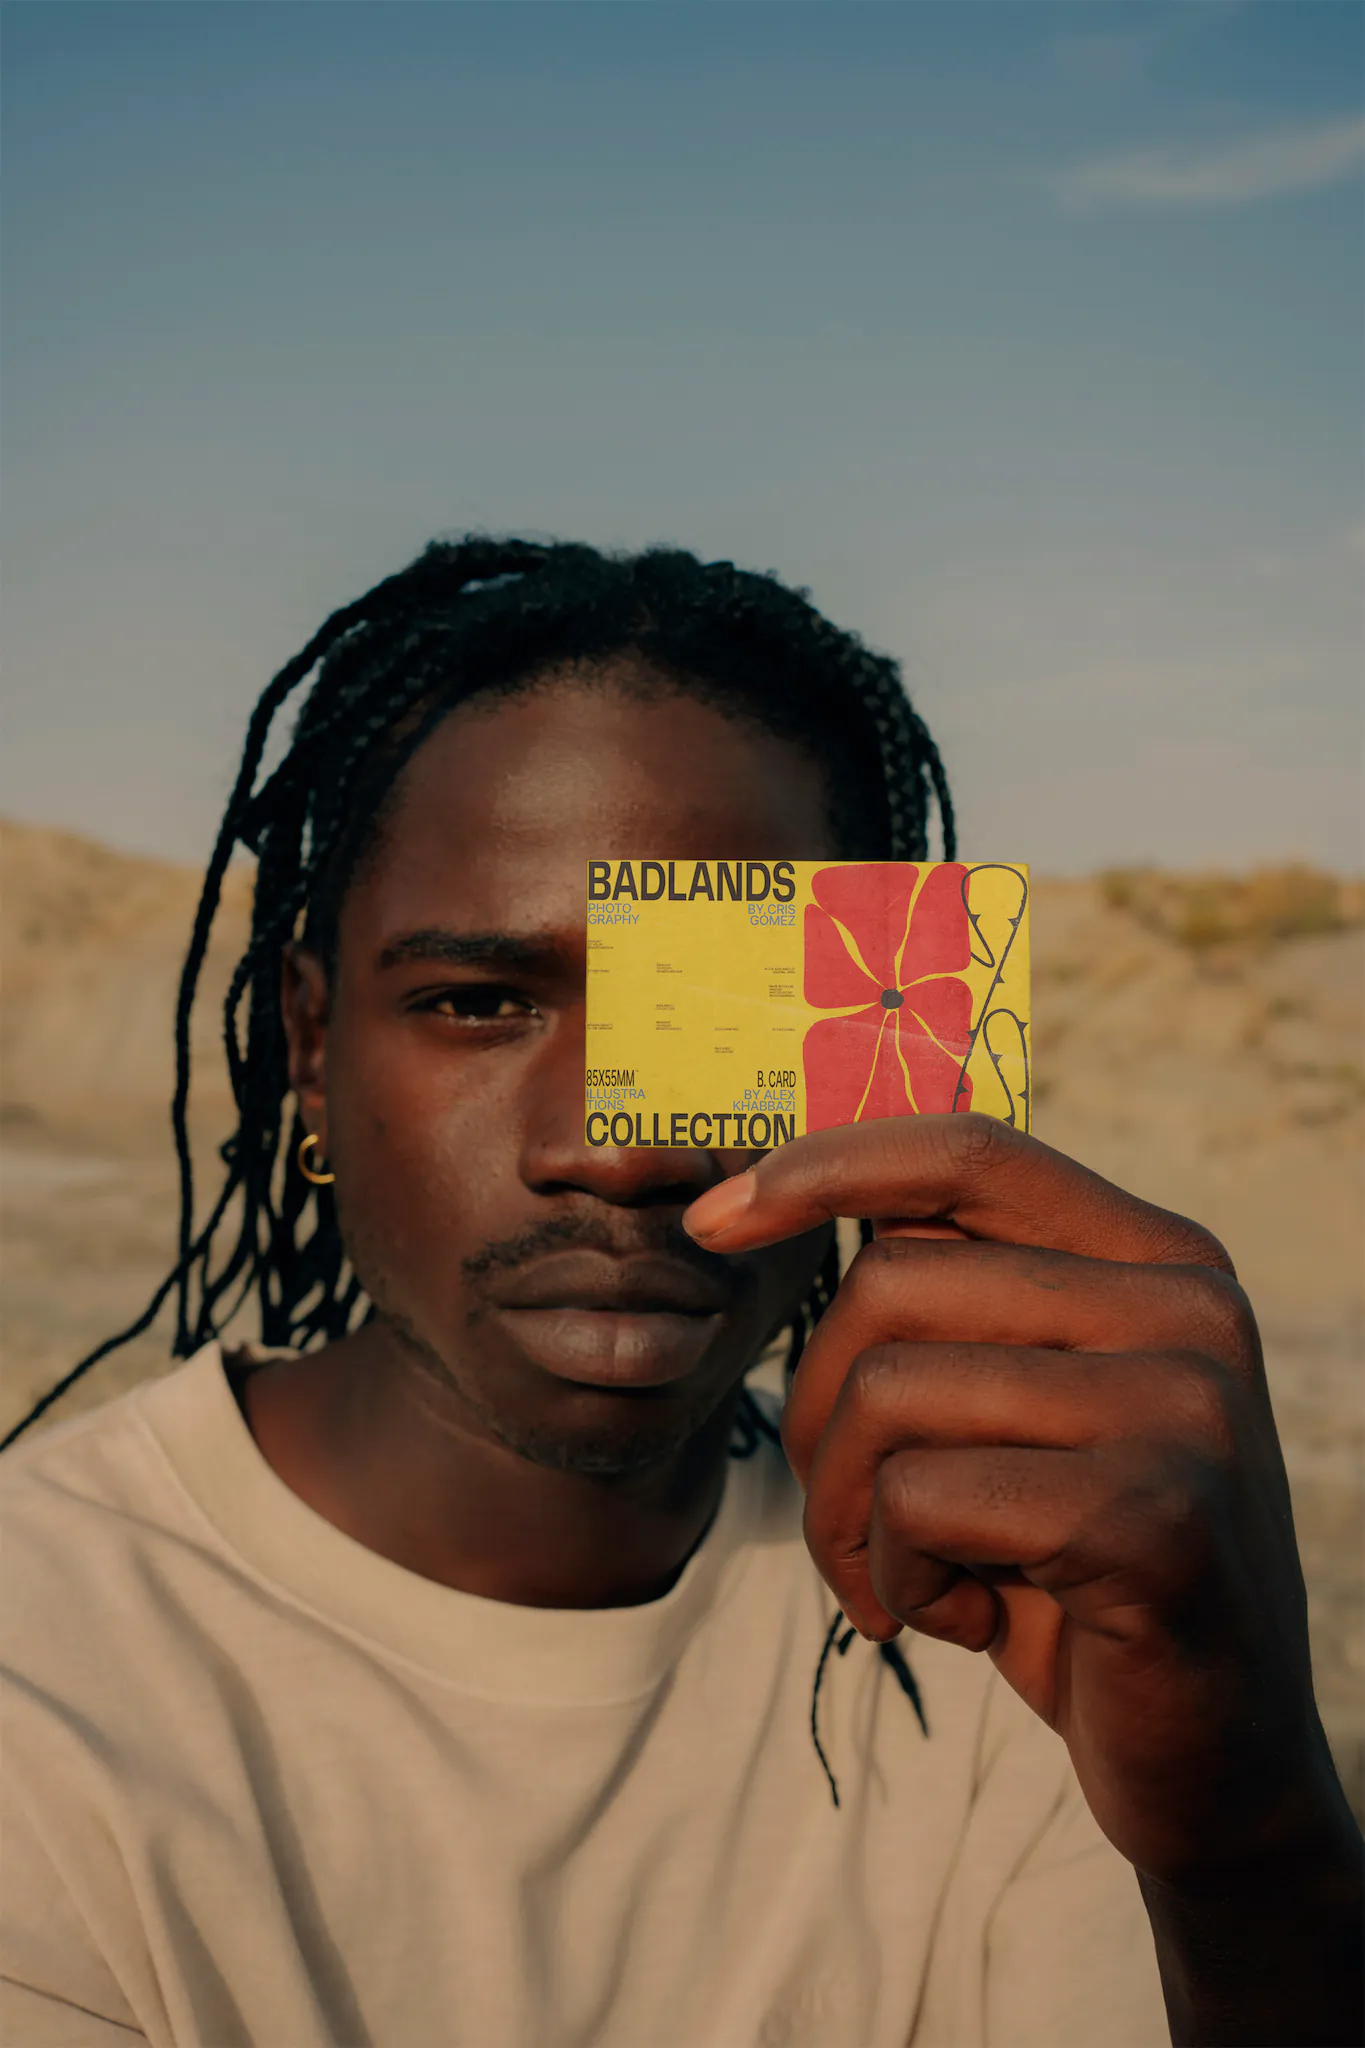 Black man holding a business card mock-up with a desert environment behind